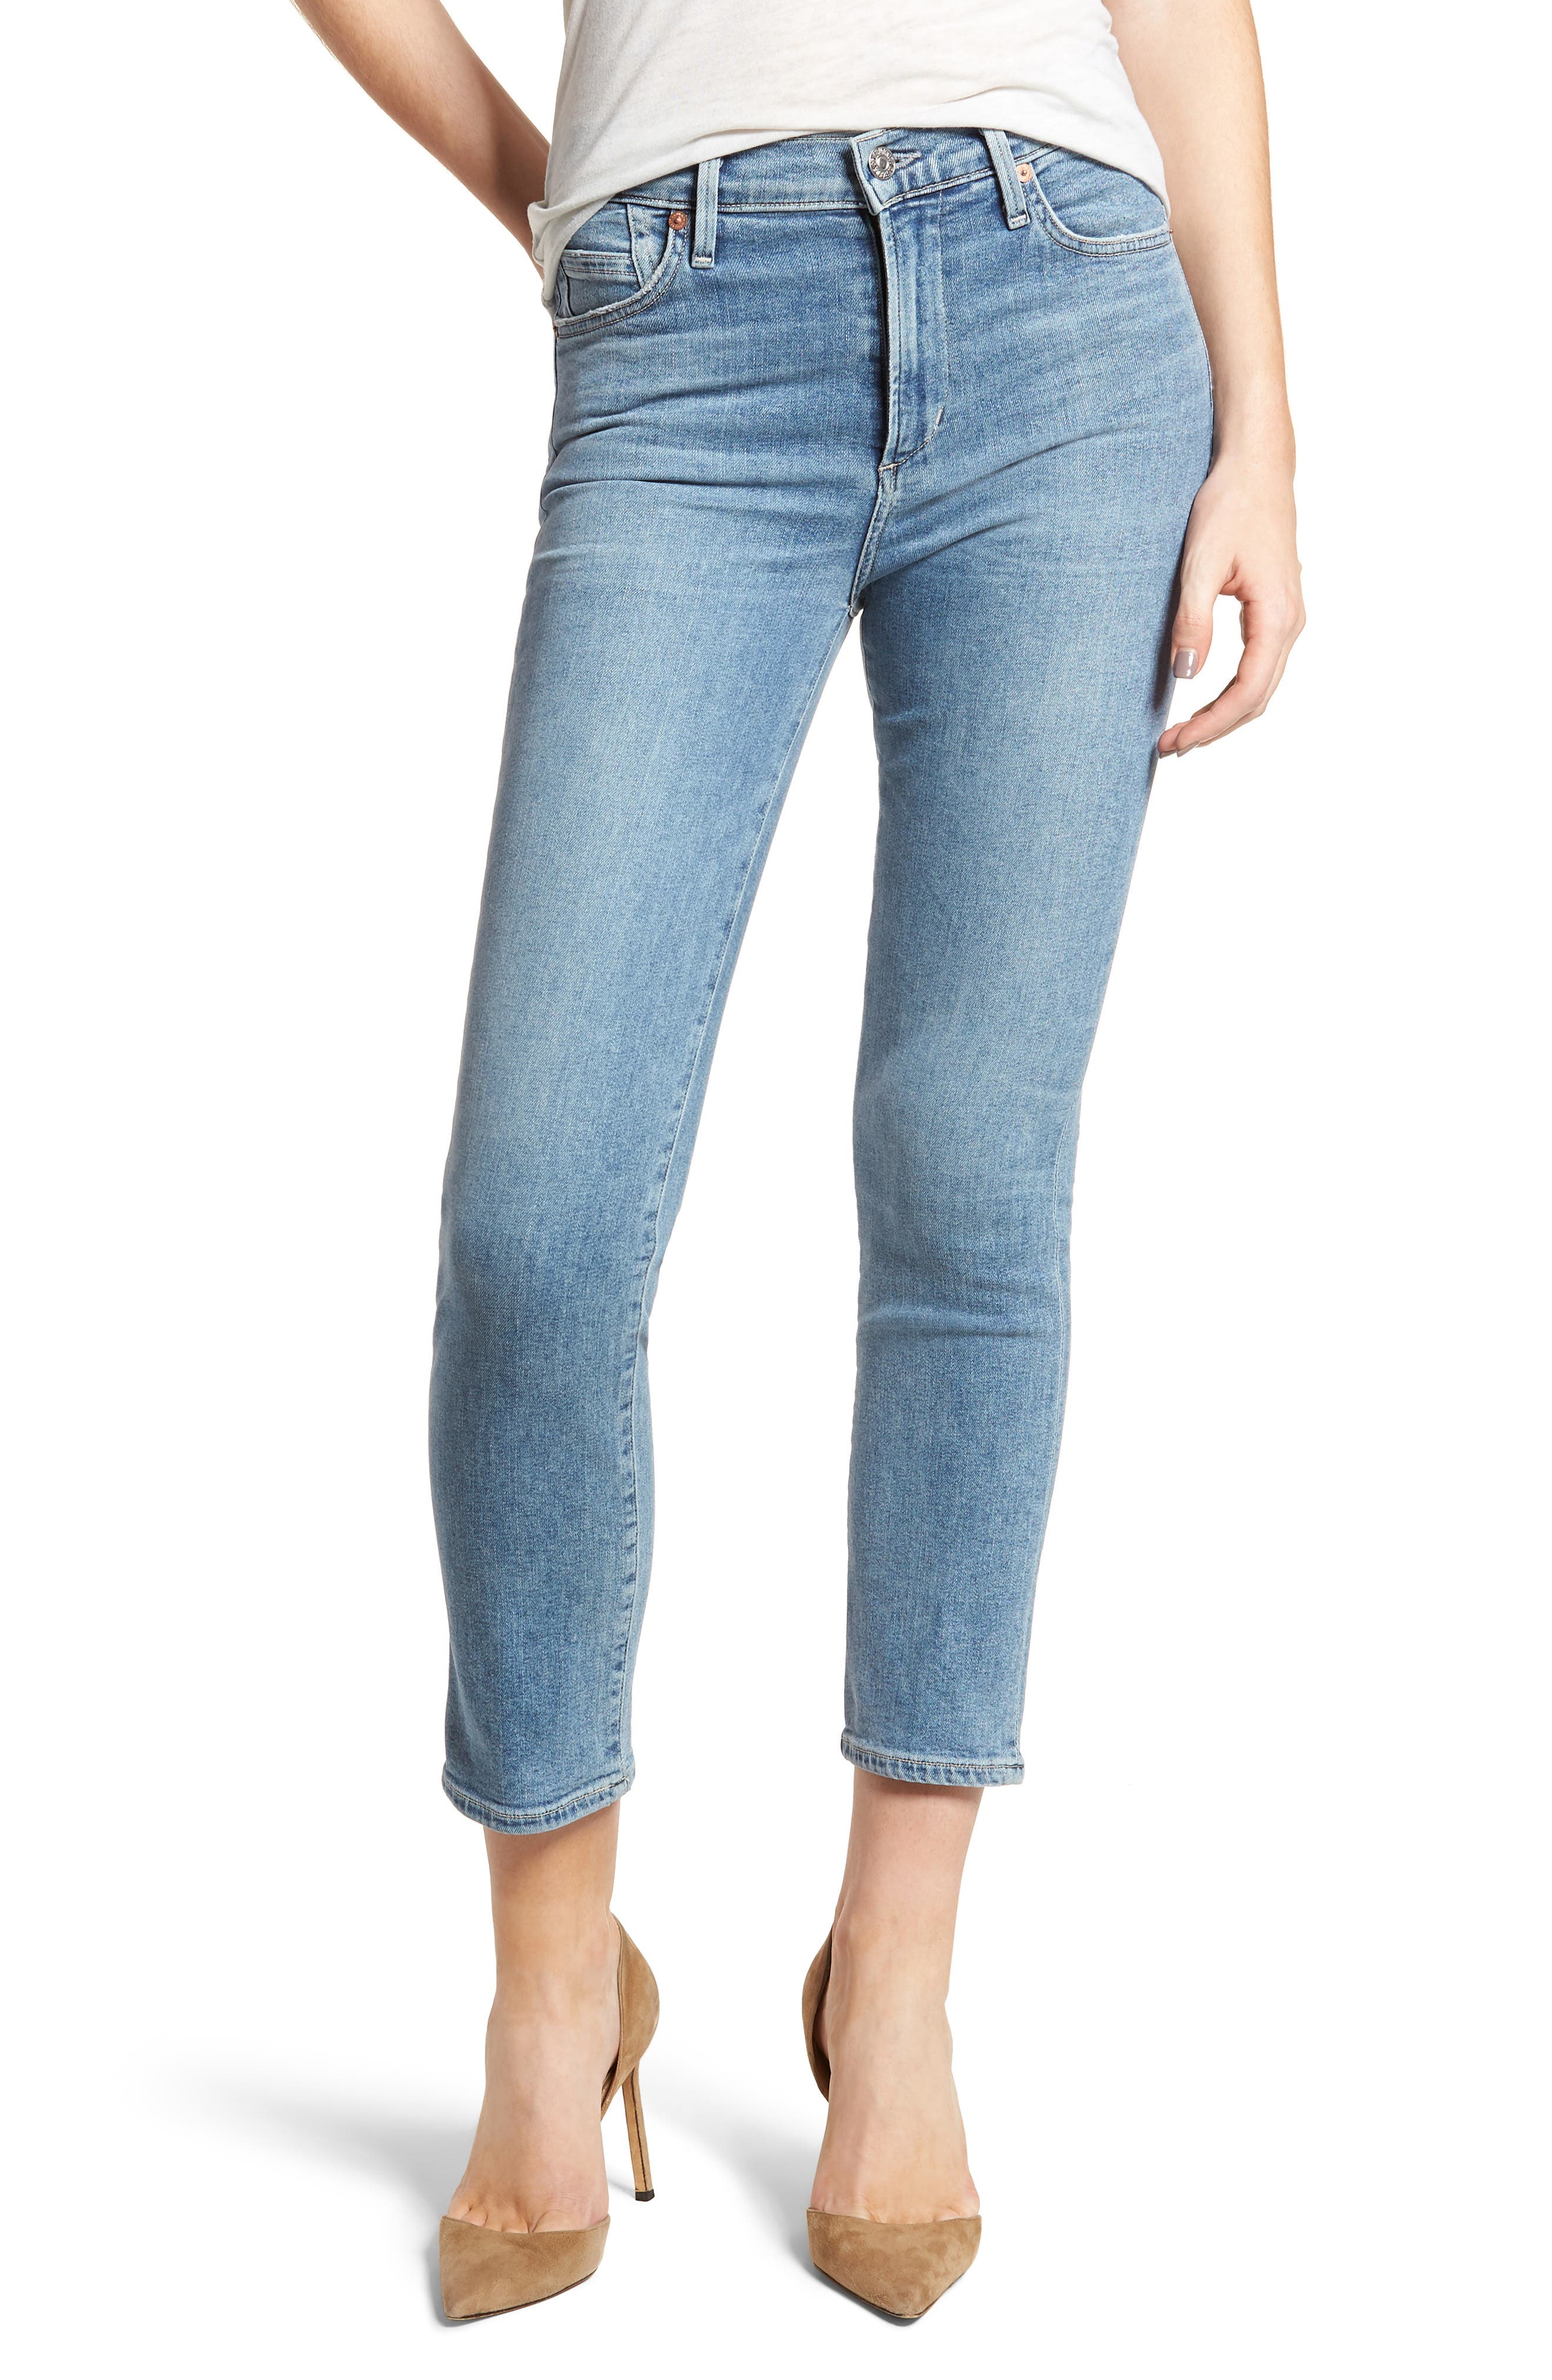 citizens of humanity cara ankle cigarette jeans